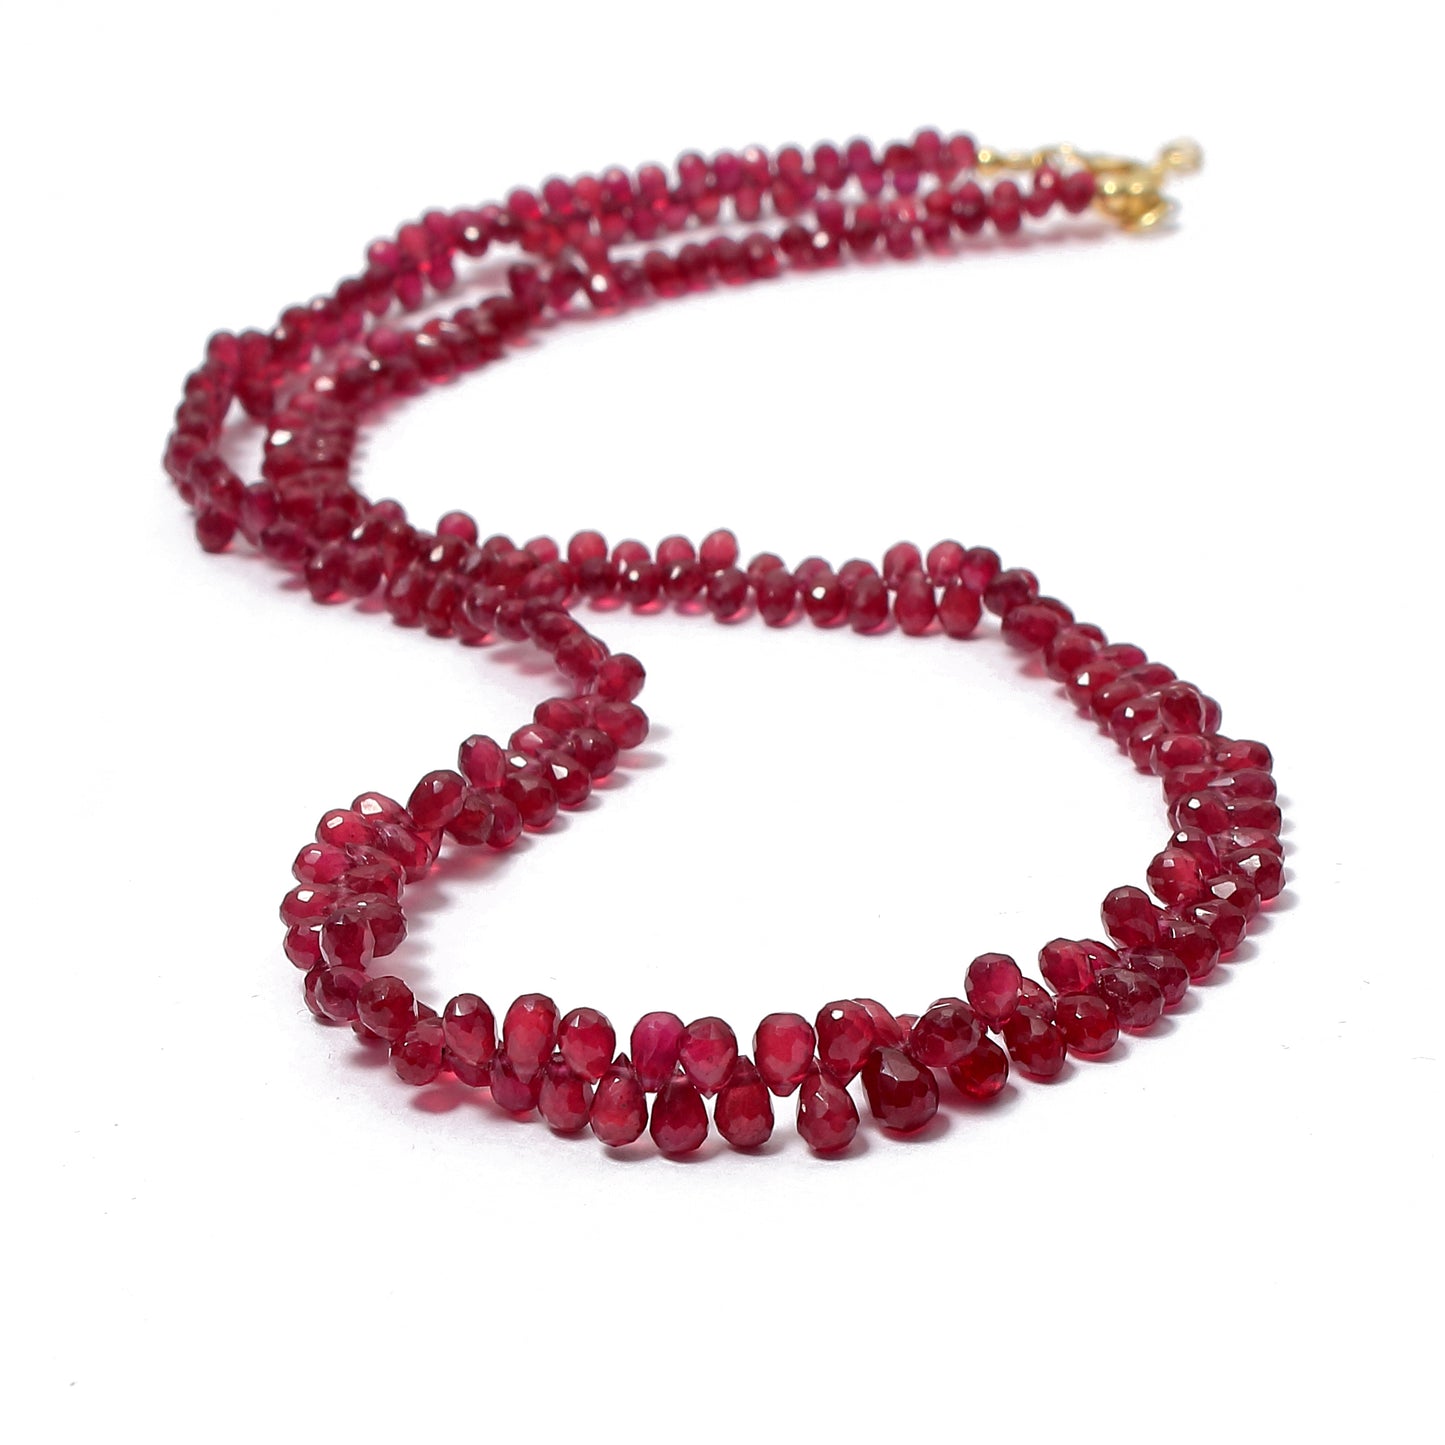 Rare Ruby Drop Necklace: A Fancy Ruby Delight for Special Occasions